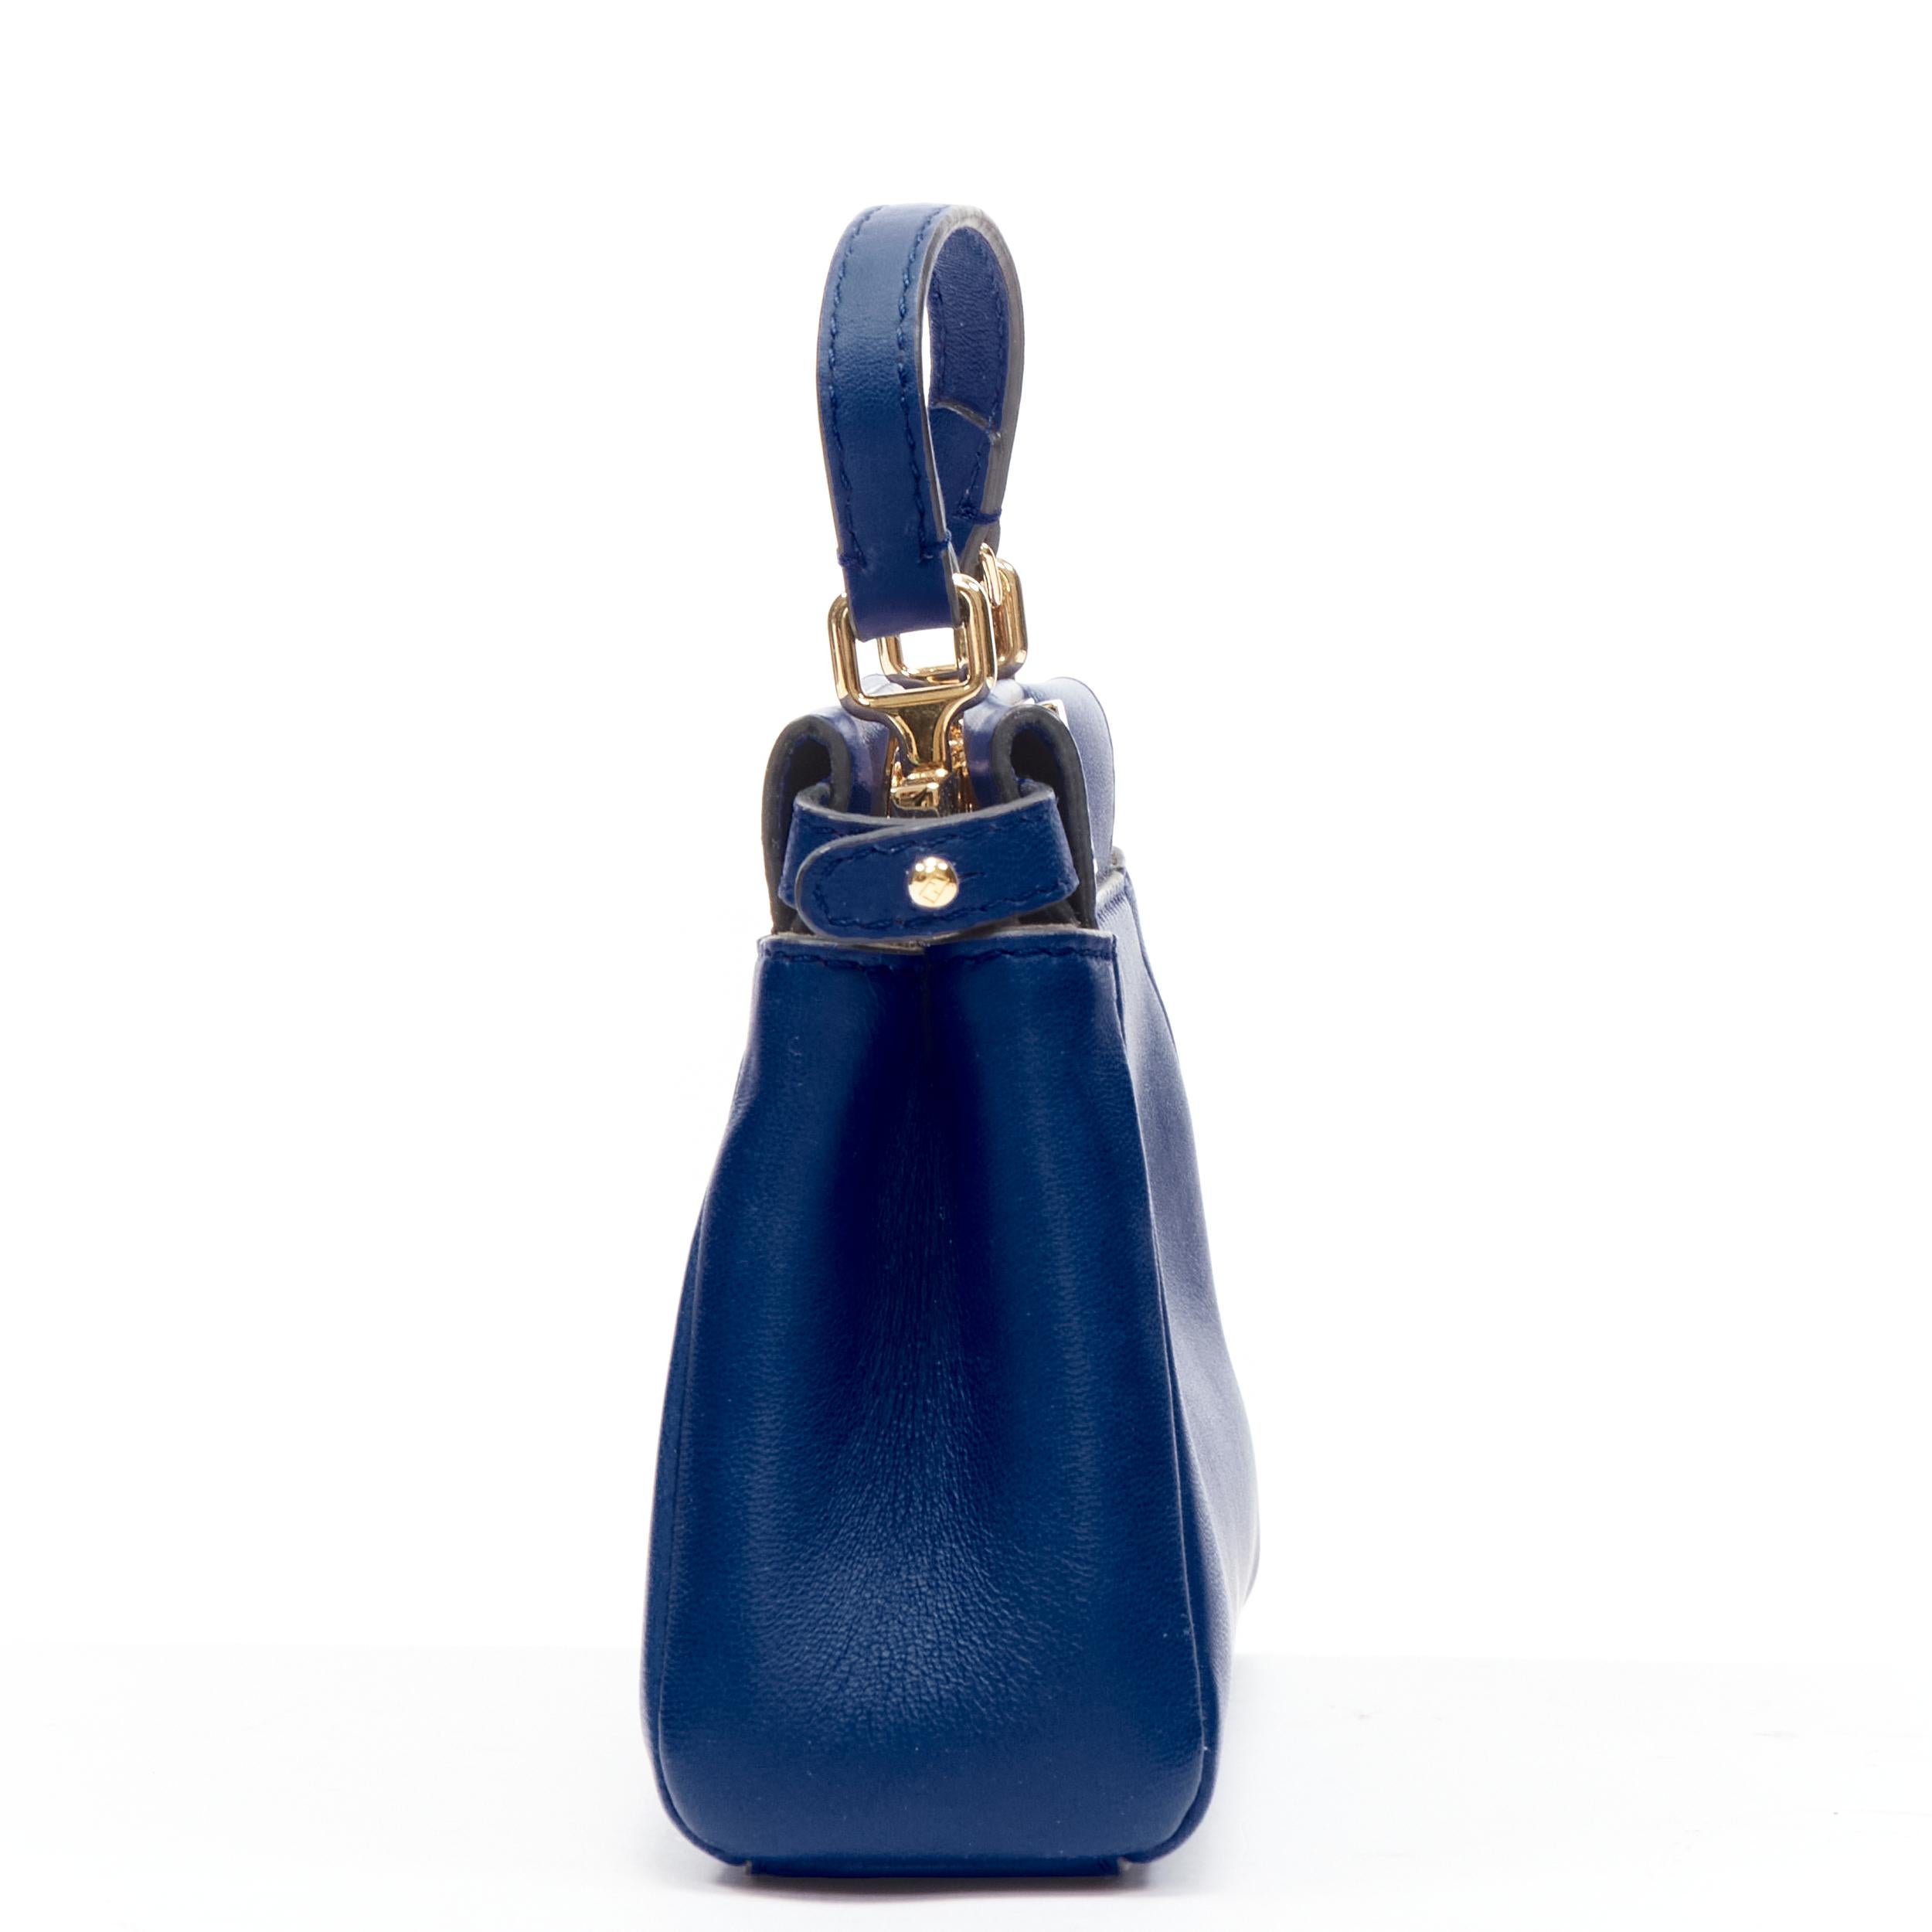 FENDI Micro Peekaboo blue leather gold hardware crossbody bag In Excellent Condition For Sale In Hong Kong, NT